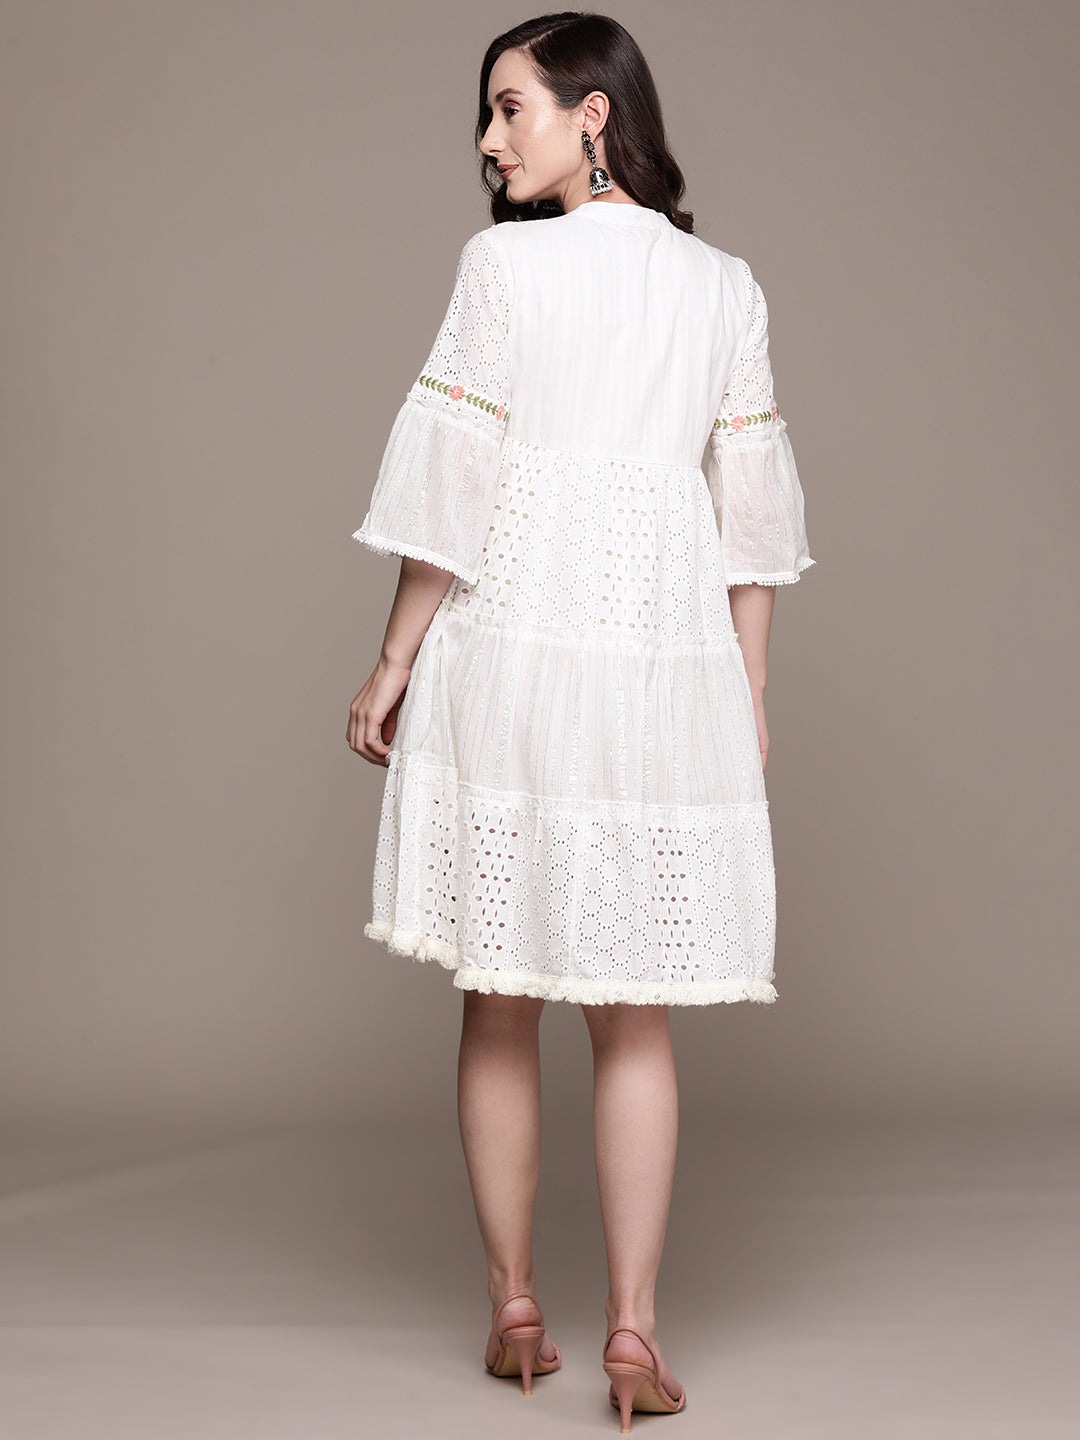 Ishin Women's Off White Embroidered A-Line Dress